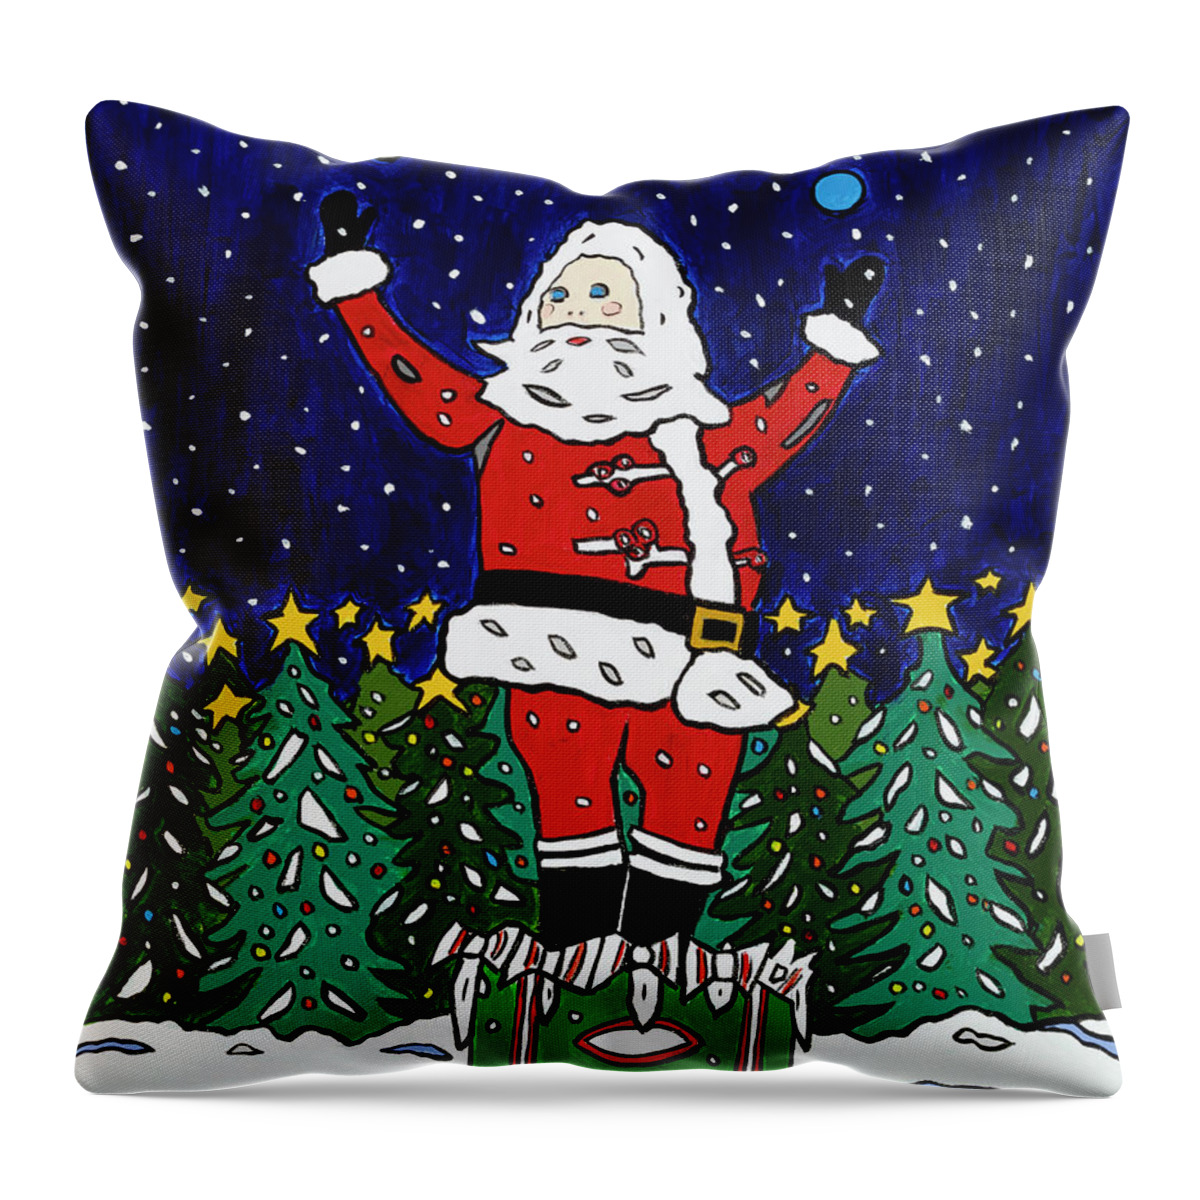 Santa Christmas Green Acres Throw Pillow featuring the painting Green Acres Santa by Mike Stanko